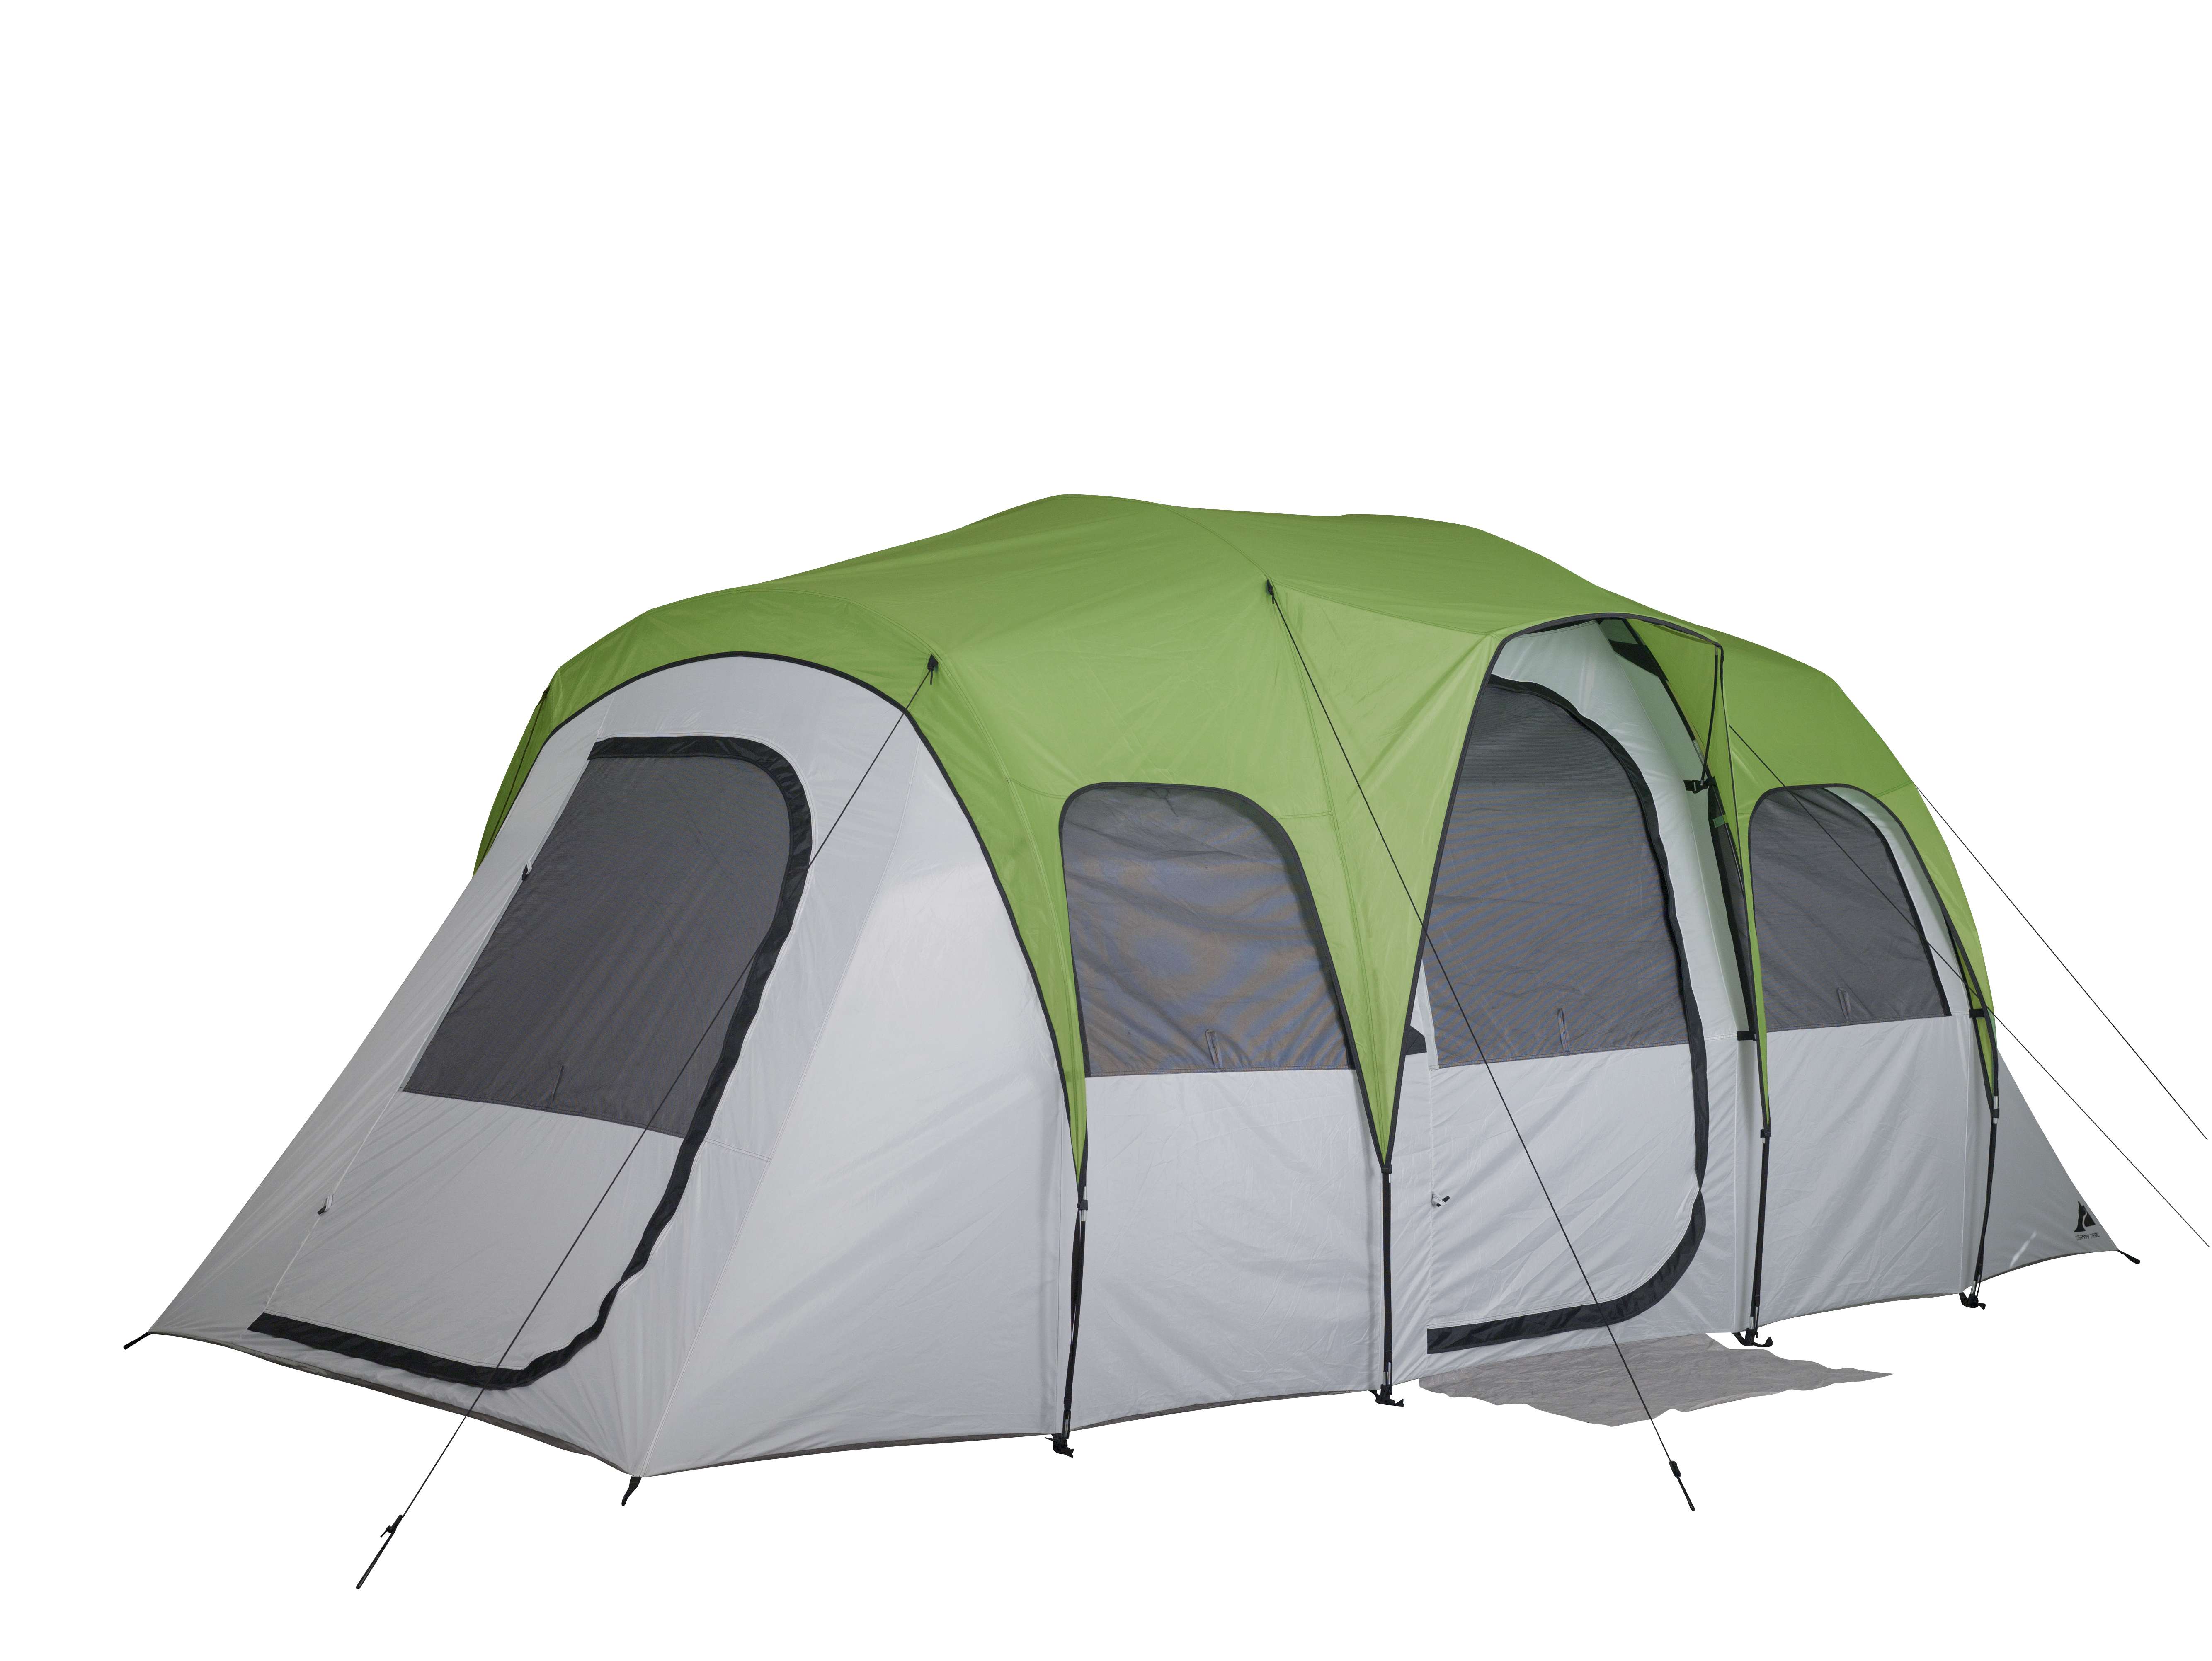 Ozark Trail 8 Person, Clip & Camp Family Tent, 16 ft. x 8 ft. x 78 in., 23.81 lbs. - image 1 of 15